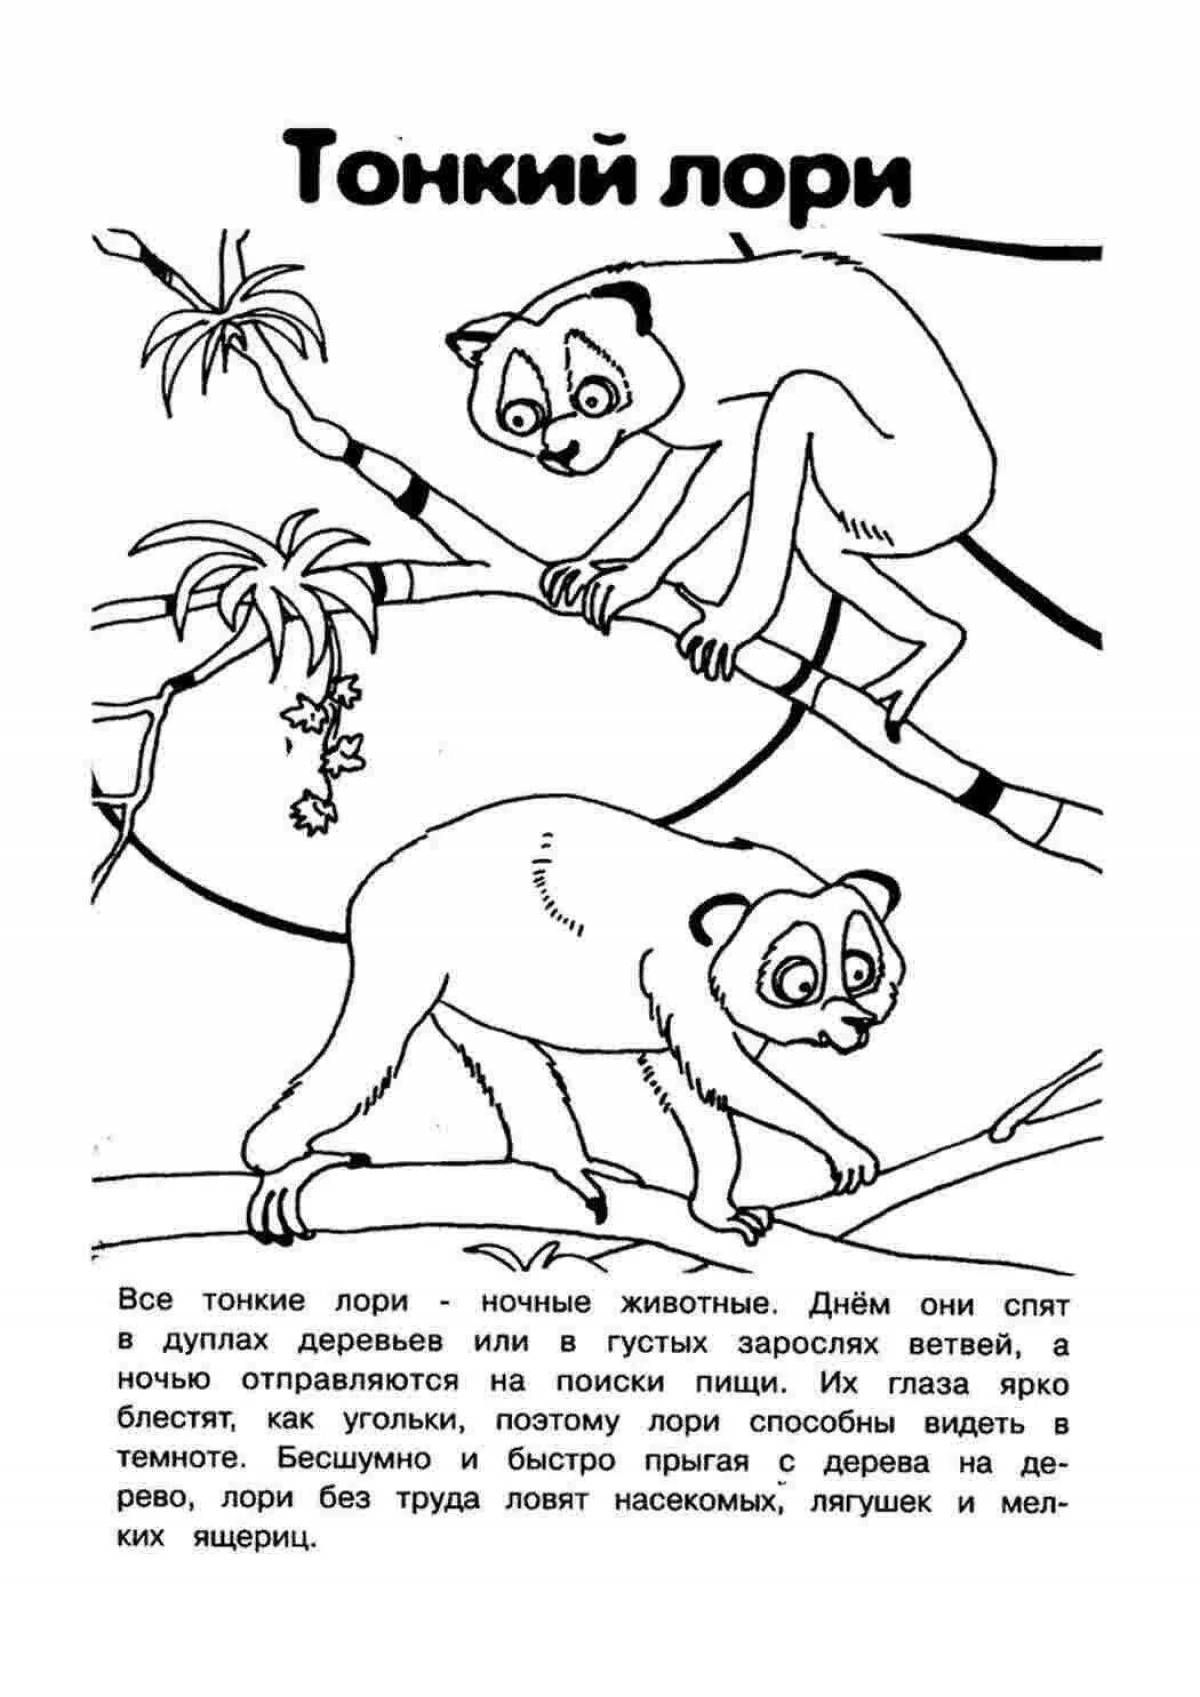 Funny animals of the red book of Russia coloring for babies